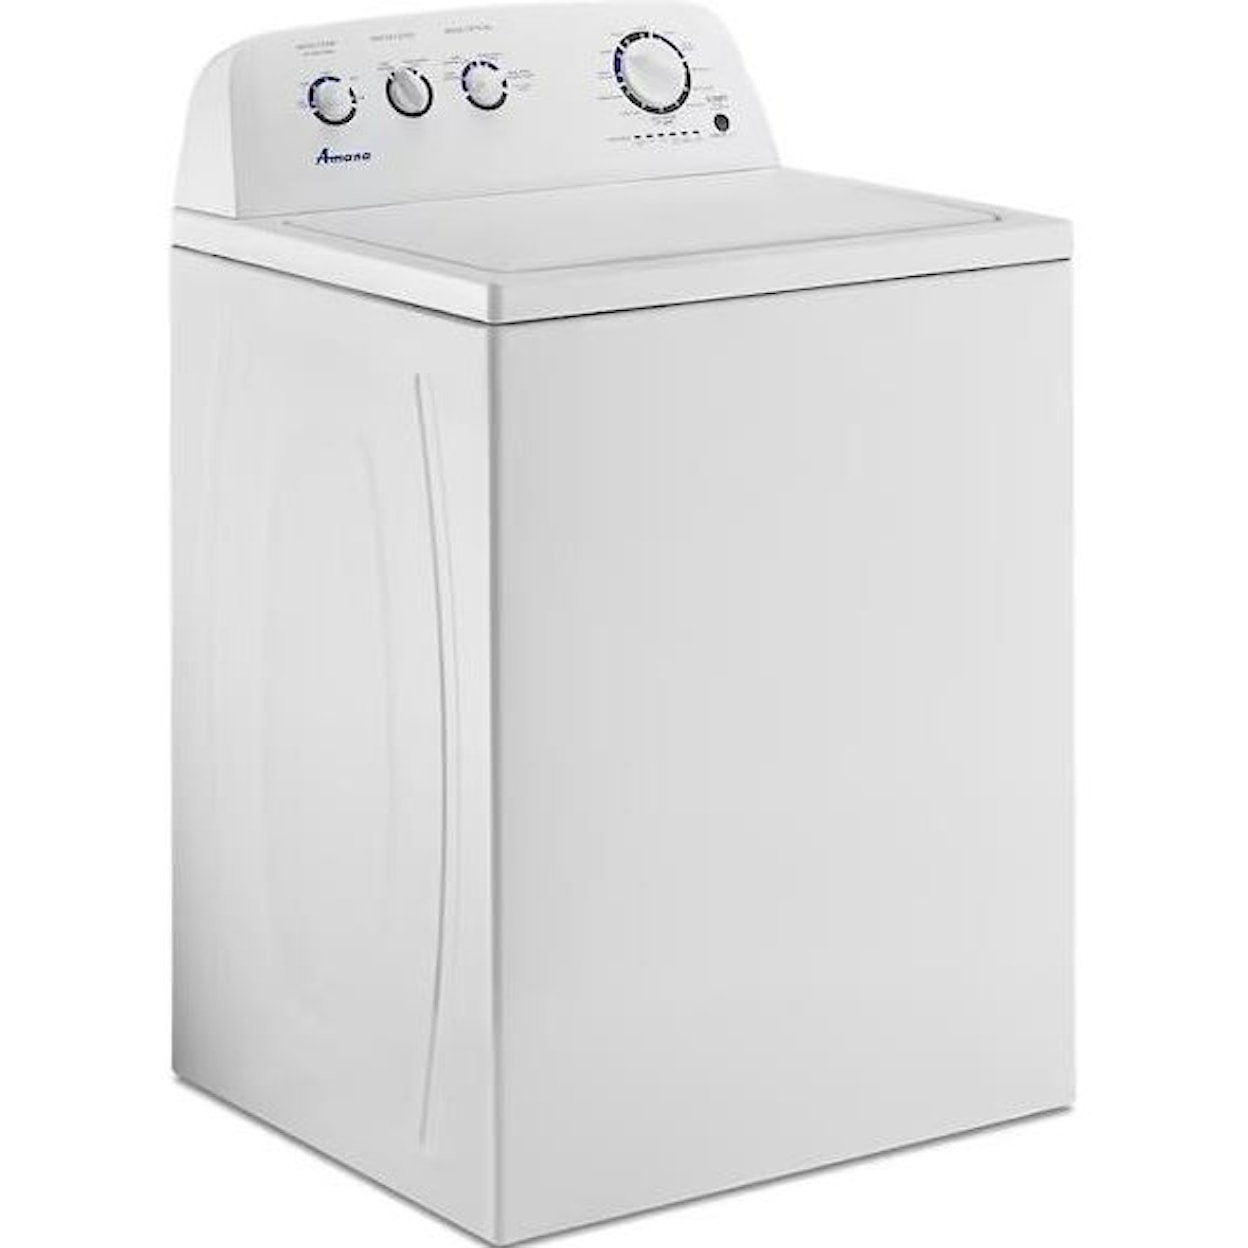 Amana Top-Load Washer 3.8 CF Top Load WASHER